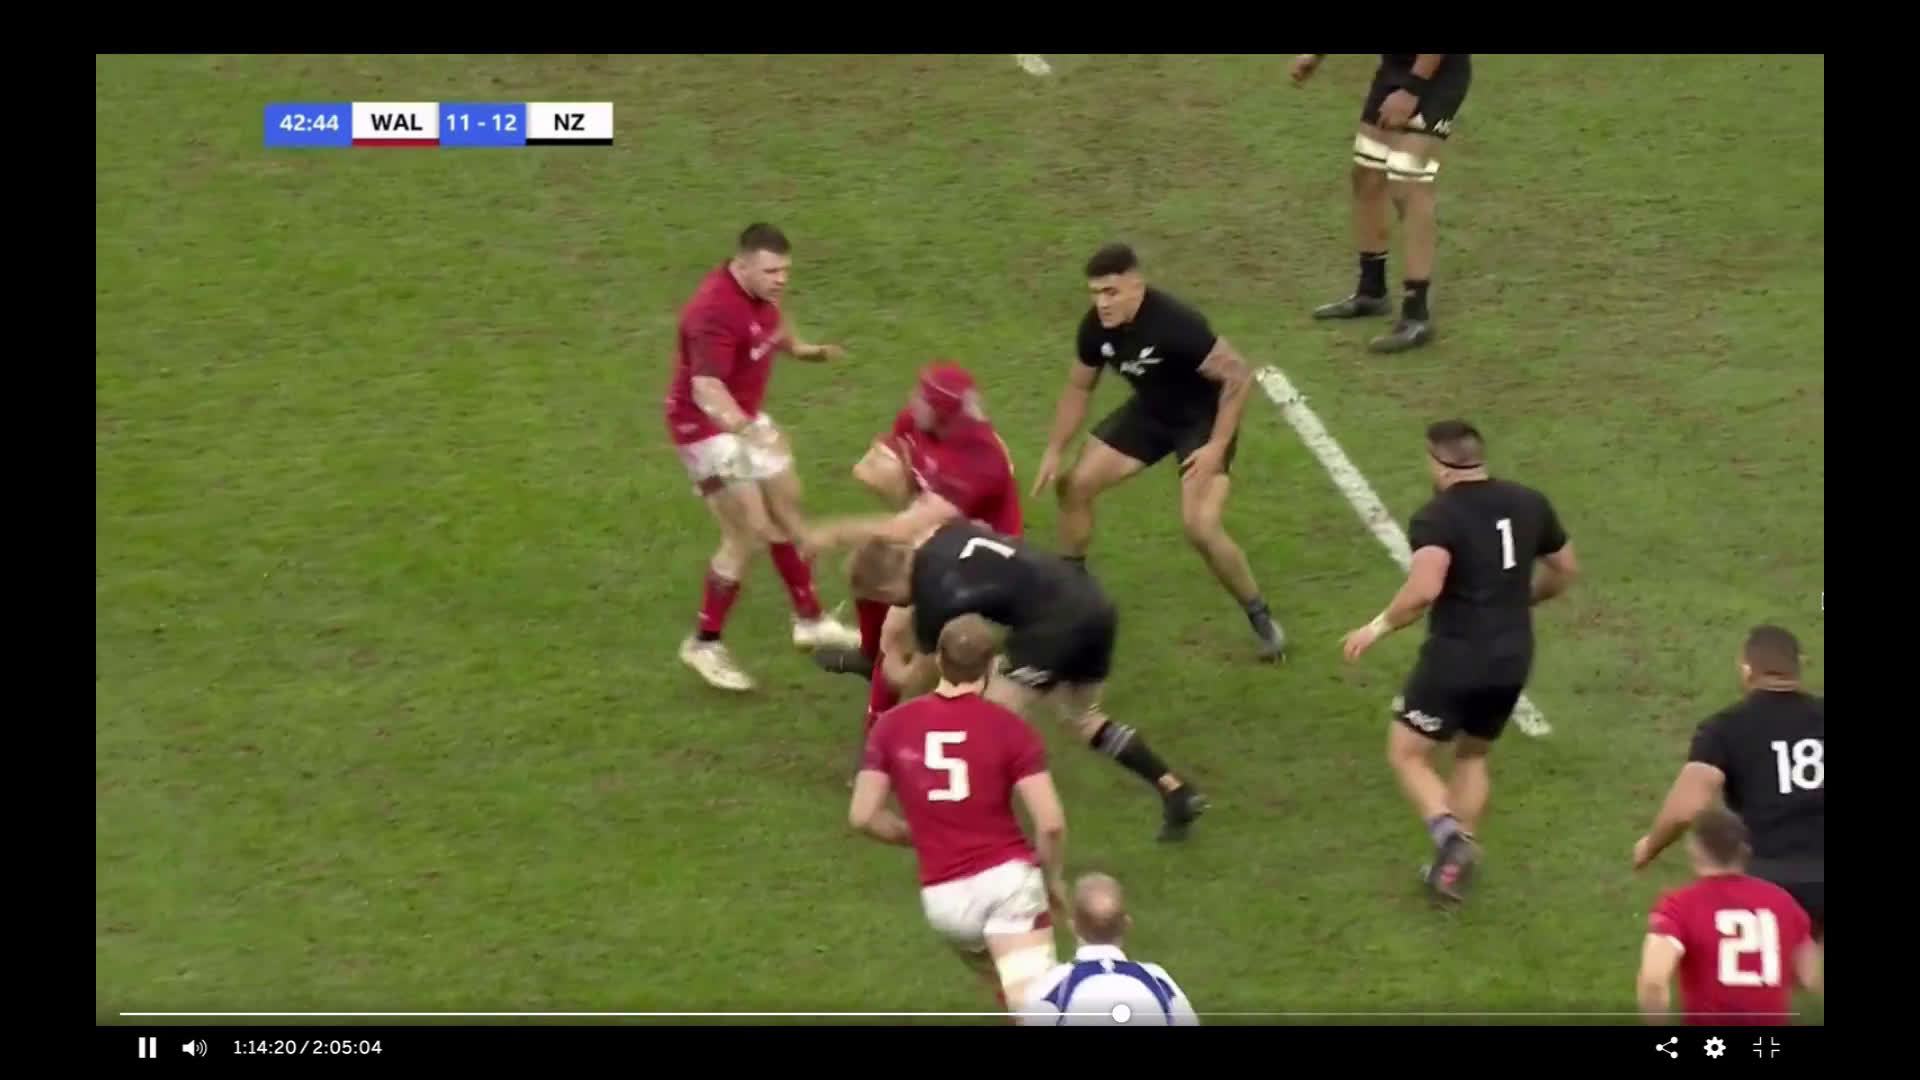 Watch Sam Cane - Defensive Highlights (Wales vs. All Blacks) | Streamable